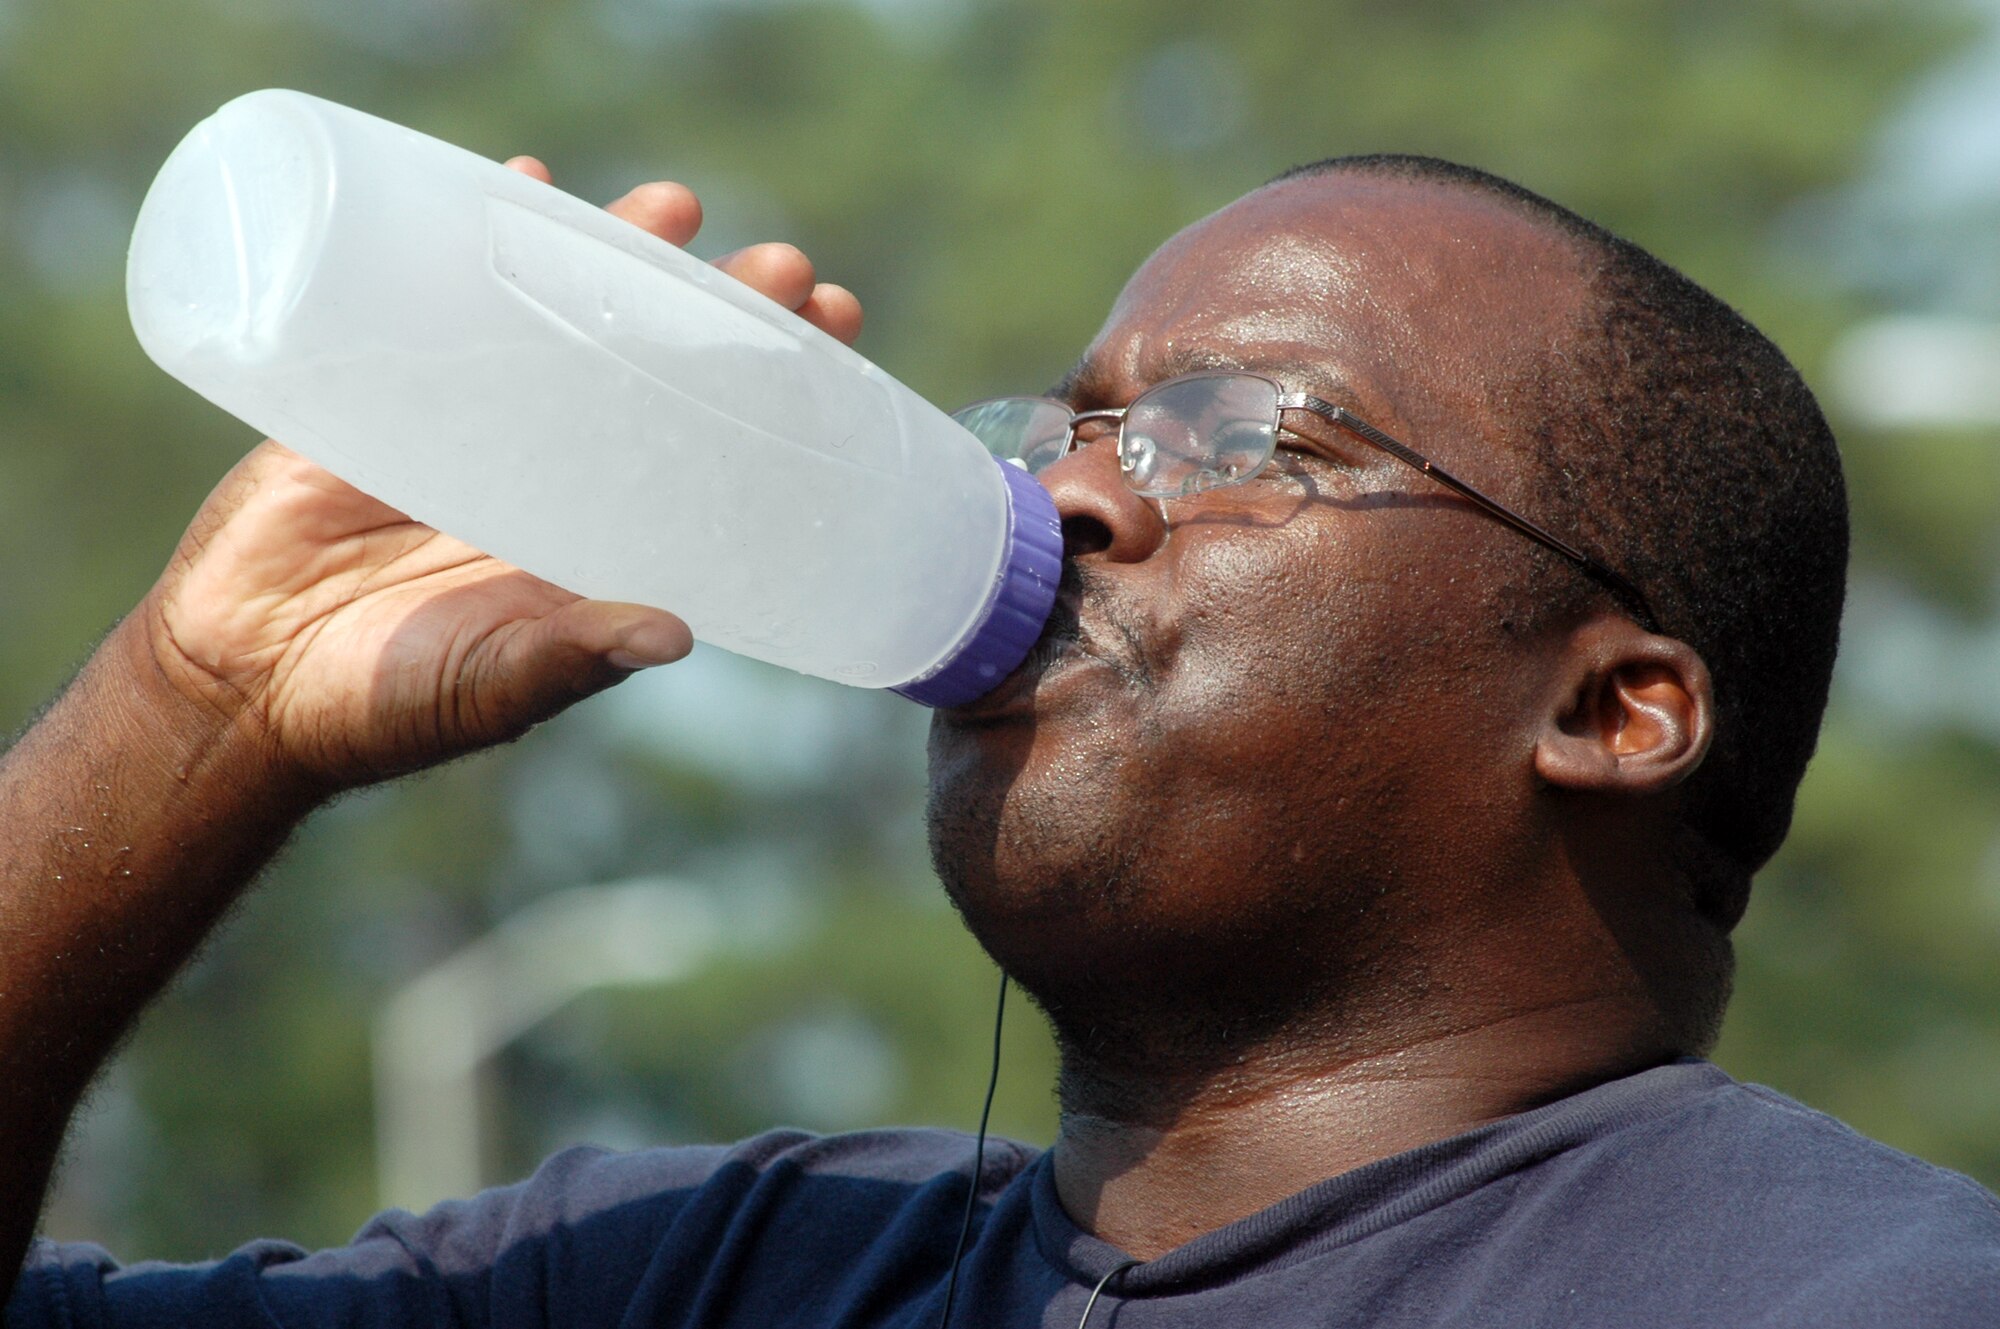 Joey Kornegay hydrates with some water after a morning of outdoor exercise. U. S. Air Force photo by Sue Sapp